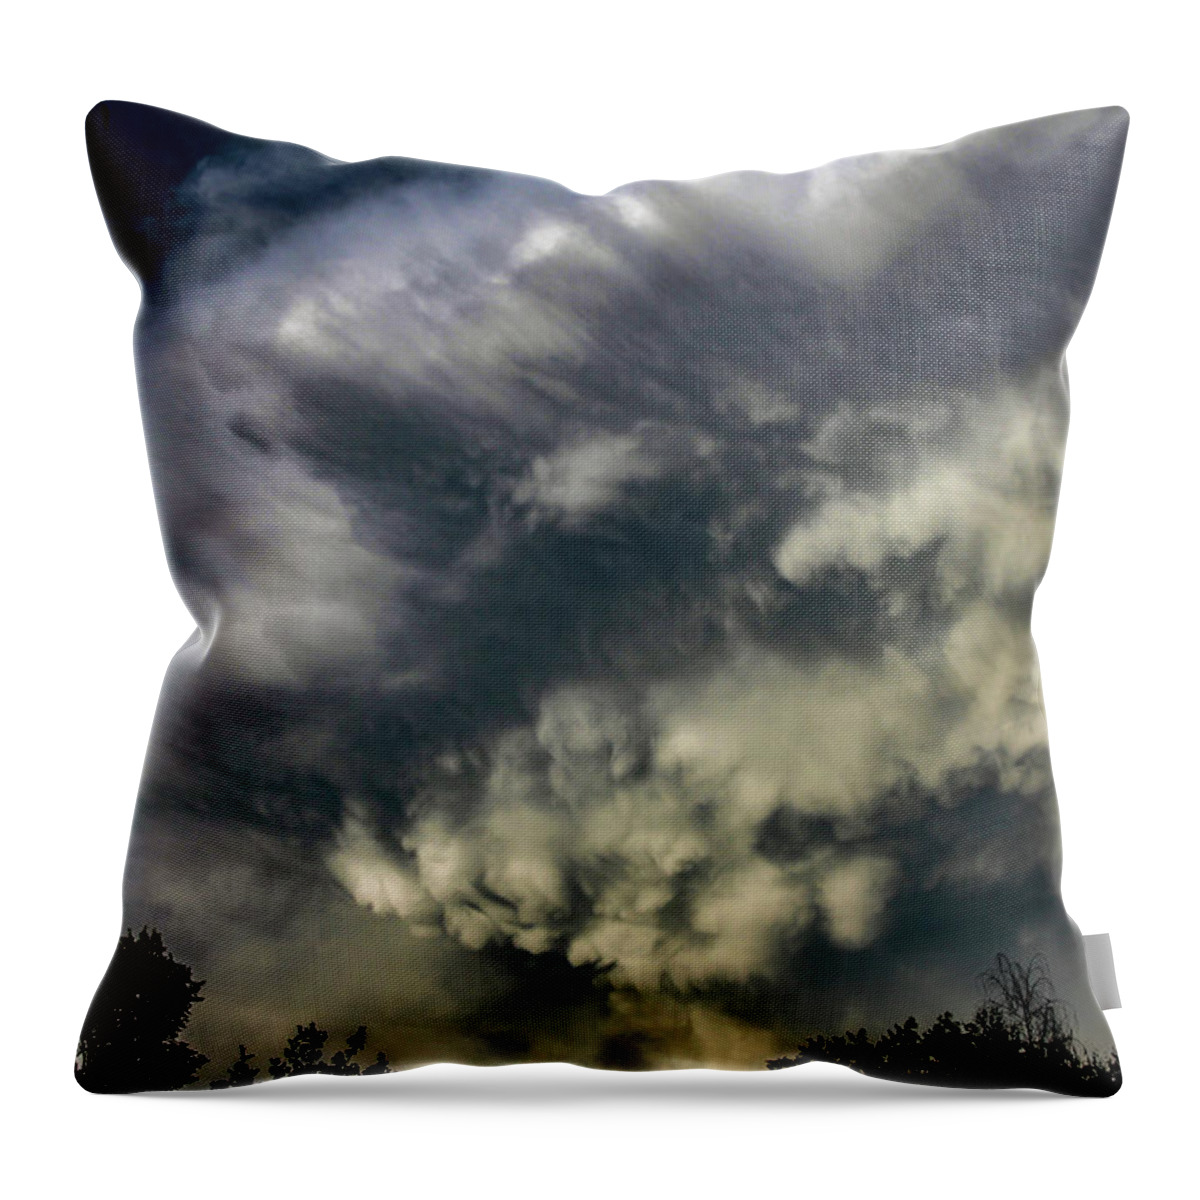 Nebraskasc Throw Pillow featuring the photograph Late Afternoon Nebraska Thunderstorms 077 by Dale Kaminski